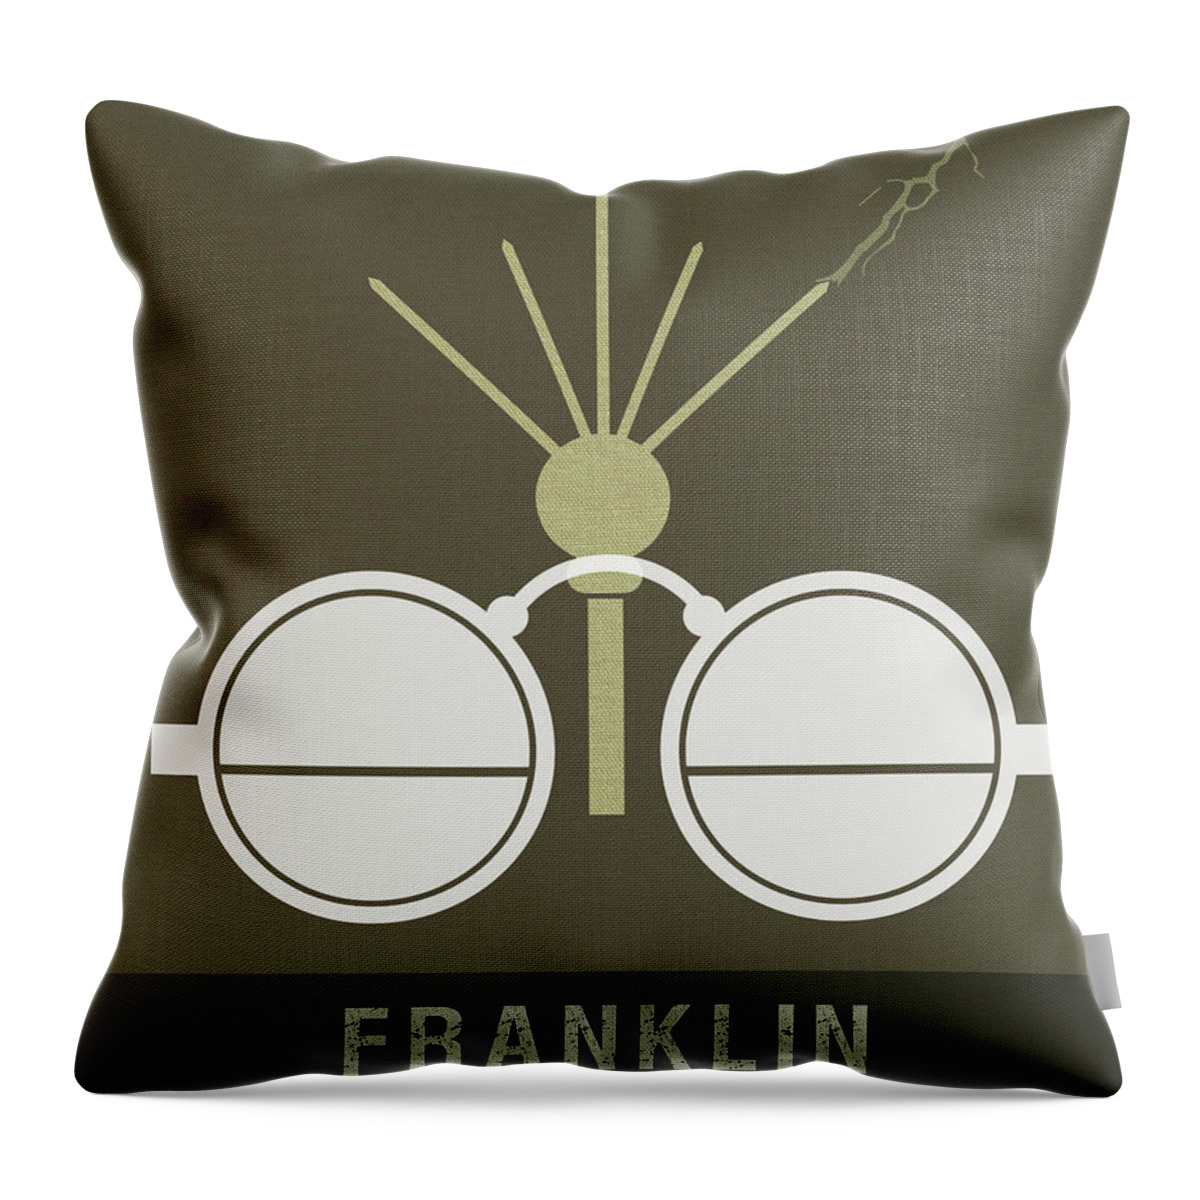 Franklin Throw Pillow featuring the mixed media Science Posters - Benjamin Franklin - Scientist, Inventor, Statesman by Studio Grafiikka